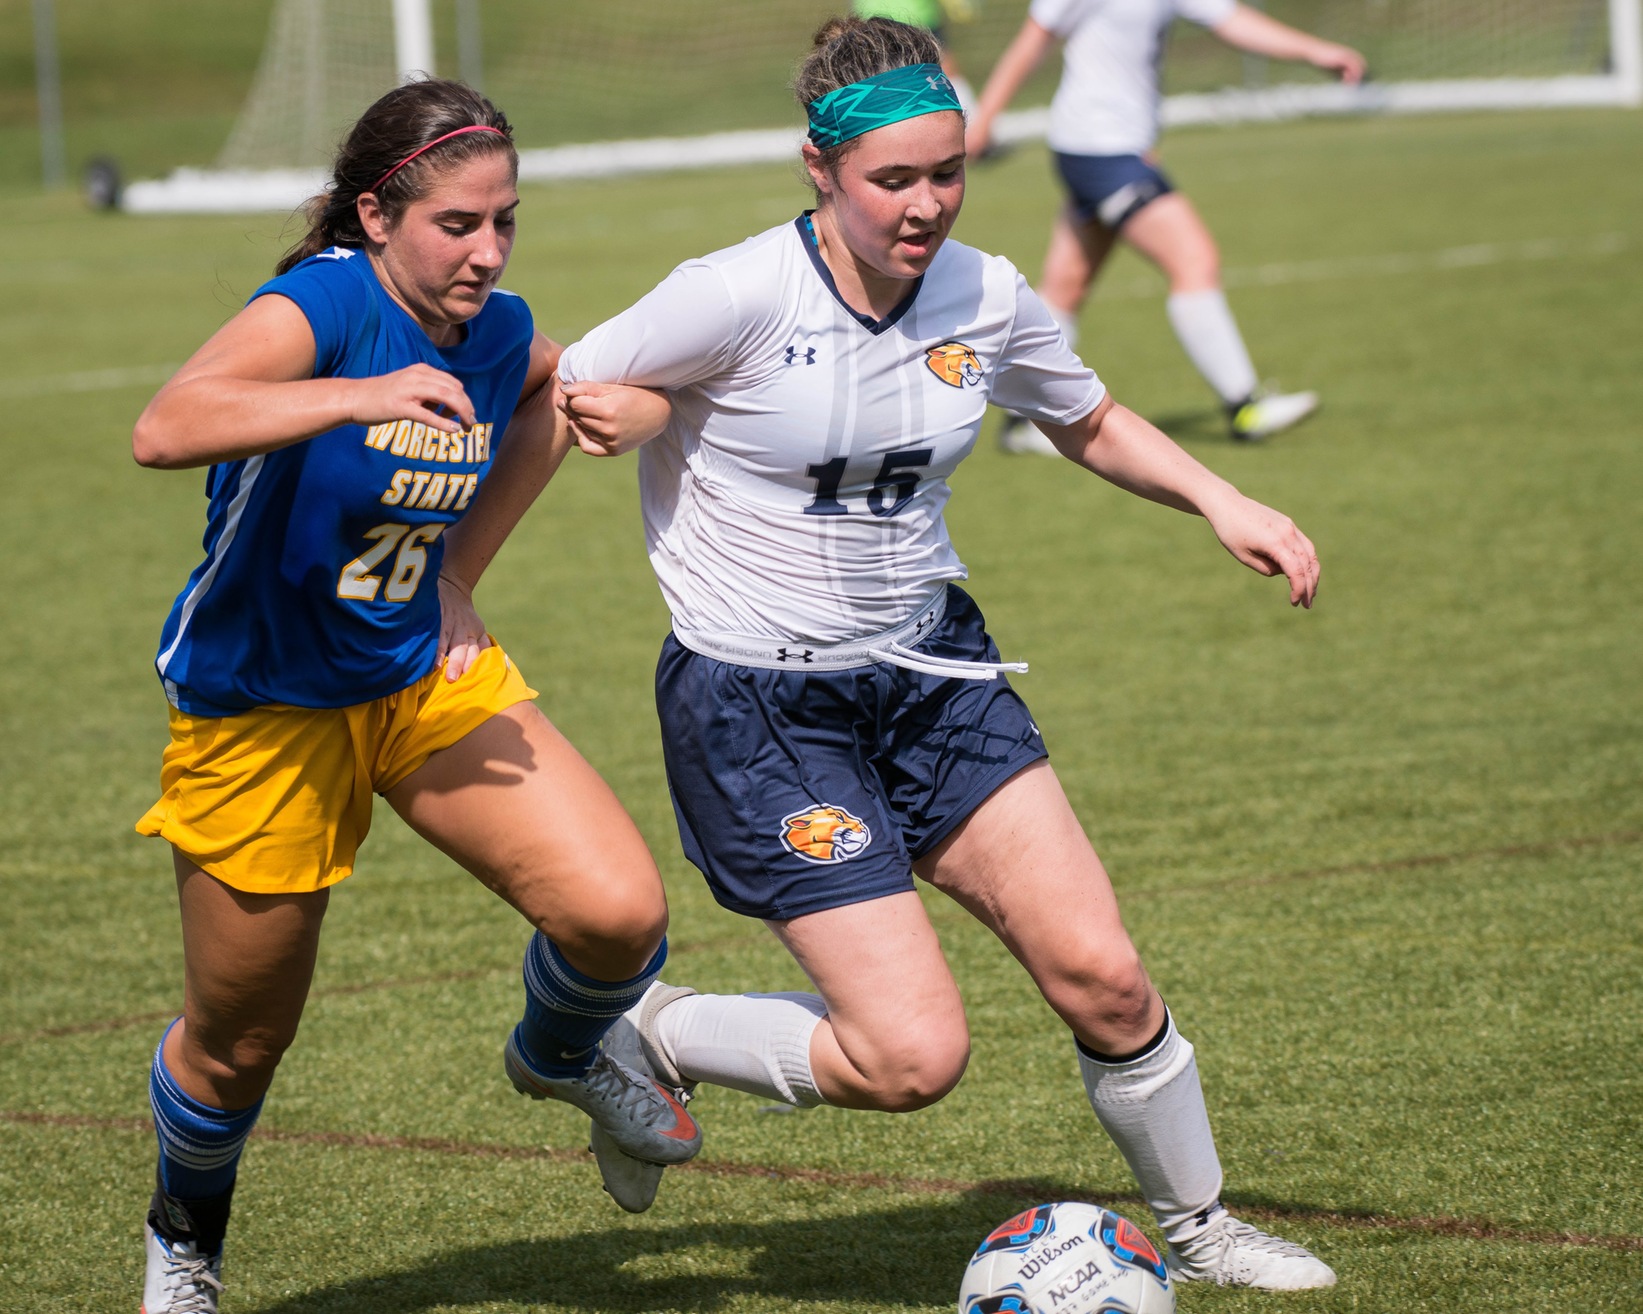 Sangiovanni, Maloney lead Women's Soccer to first win of season, 2-0 over Cobleskill